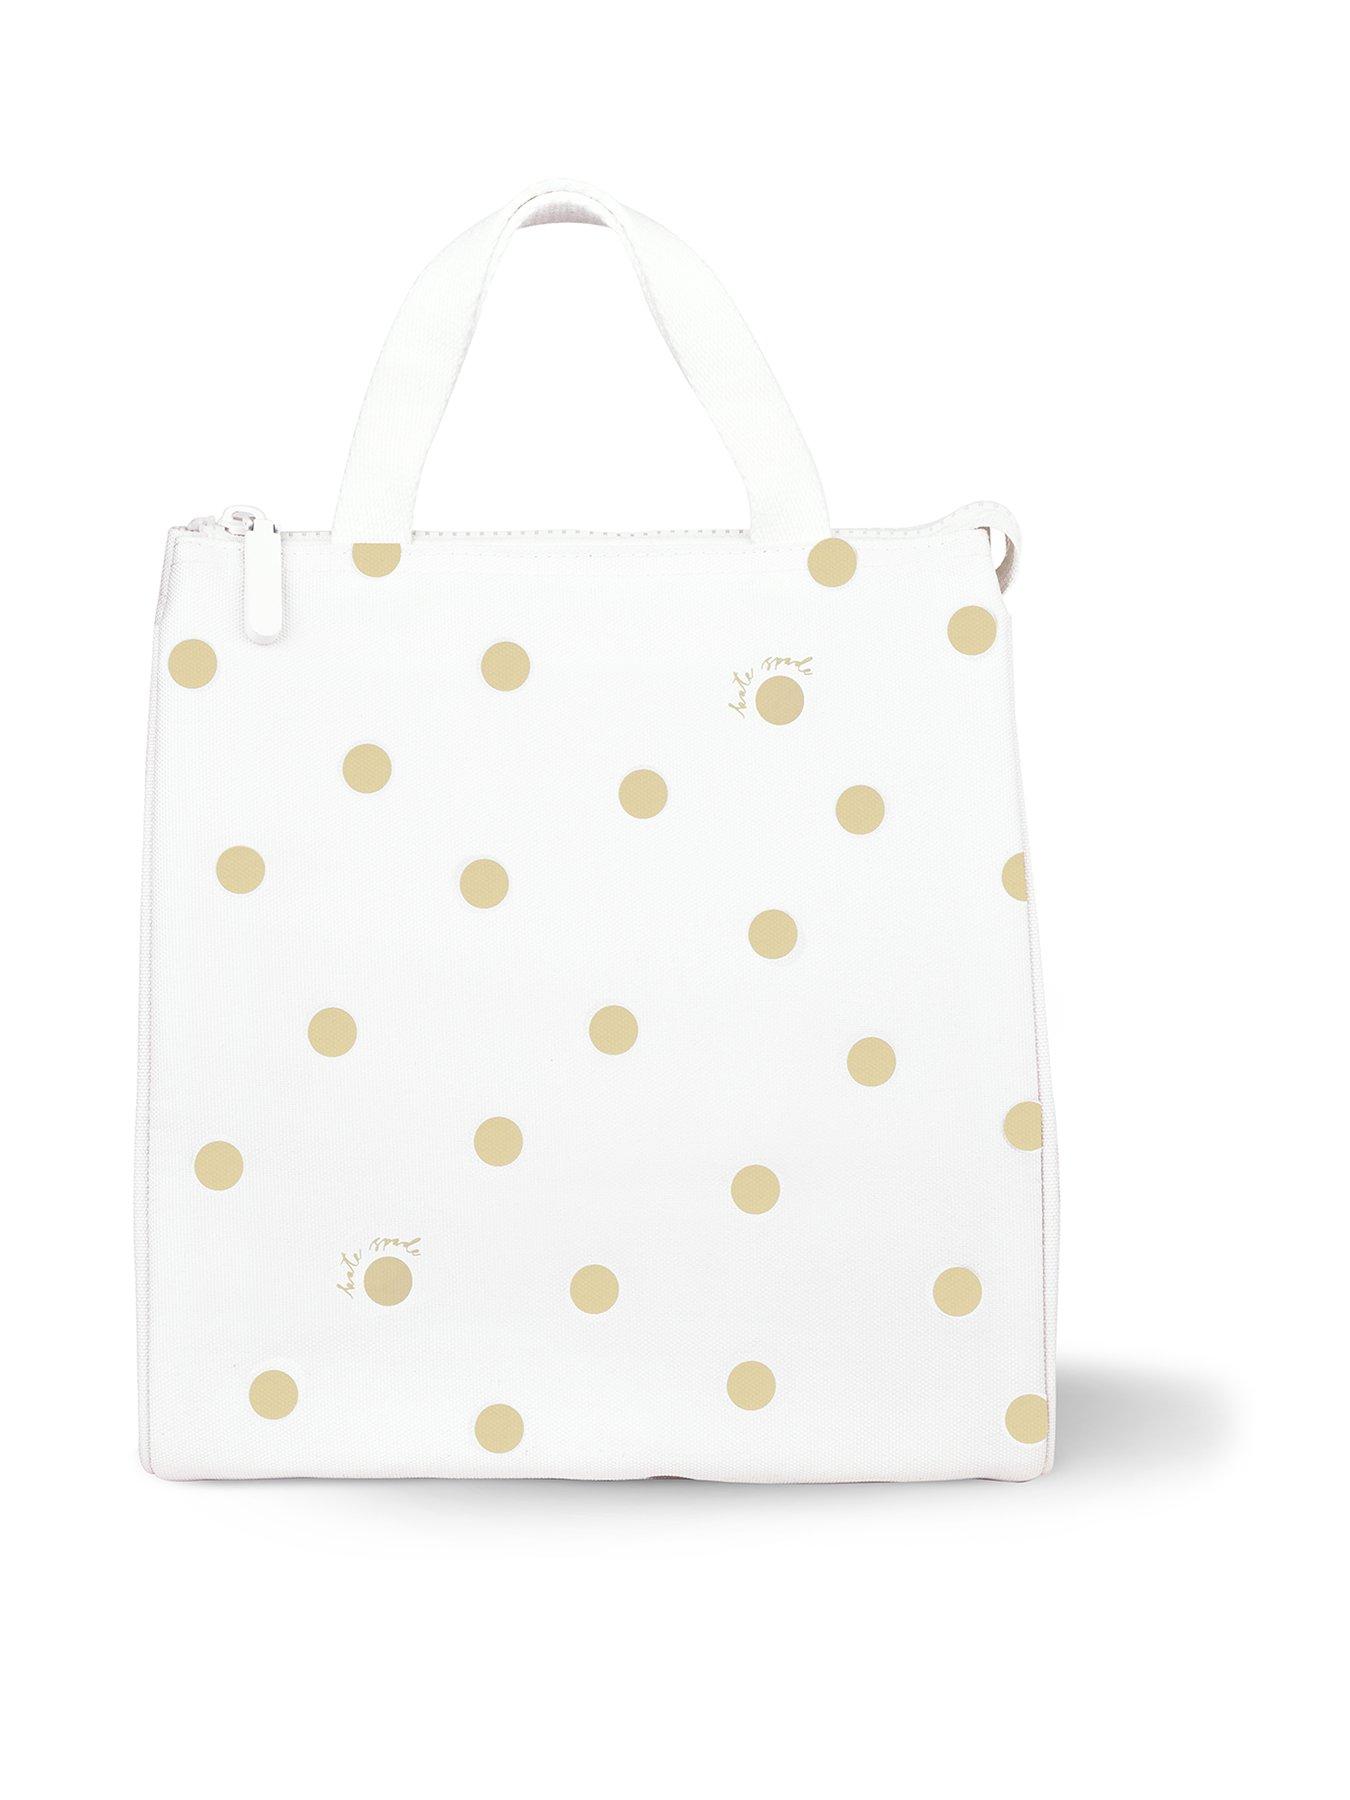 Kate Spade New York Lunch Bag, Gold Dot with Script 